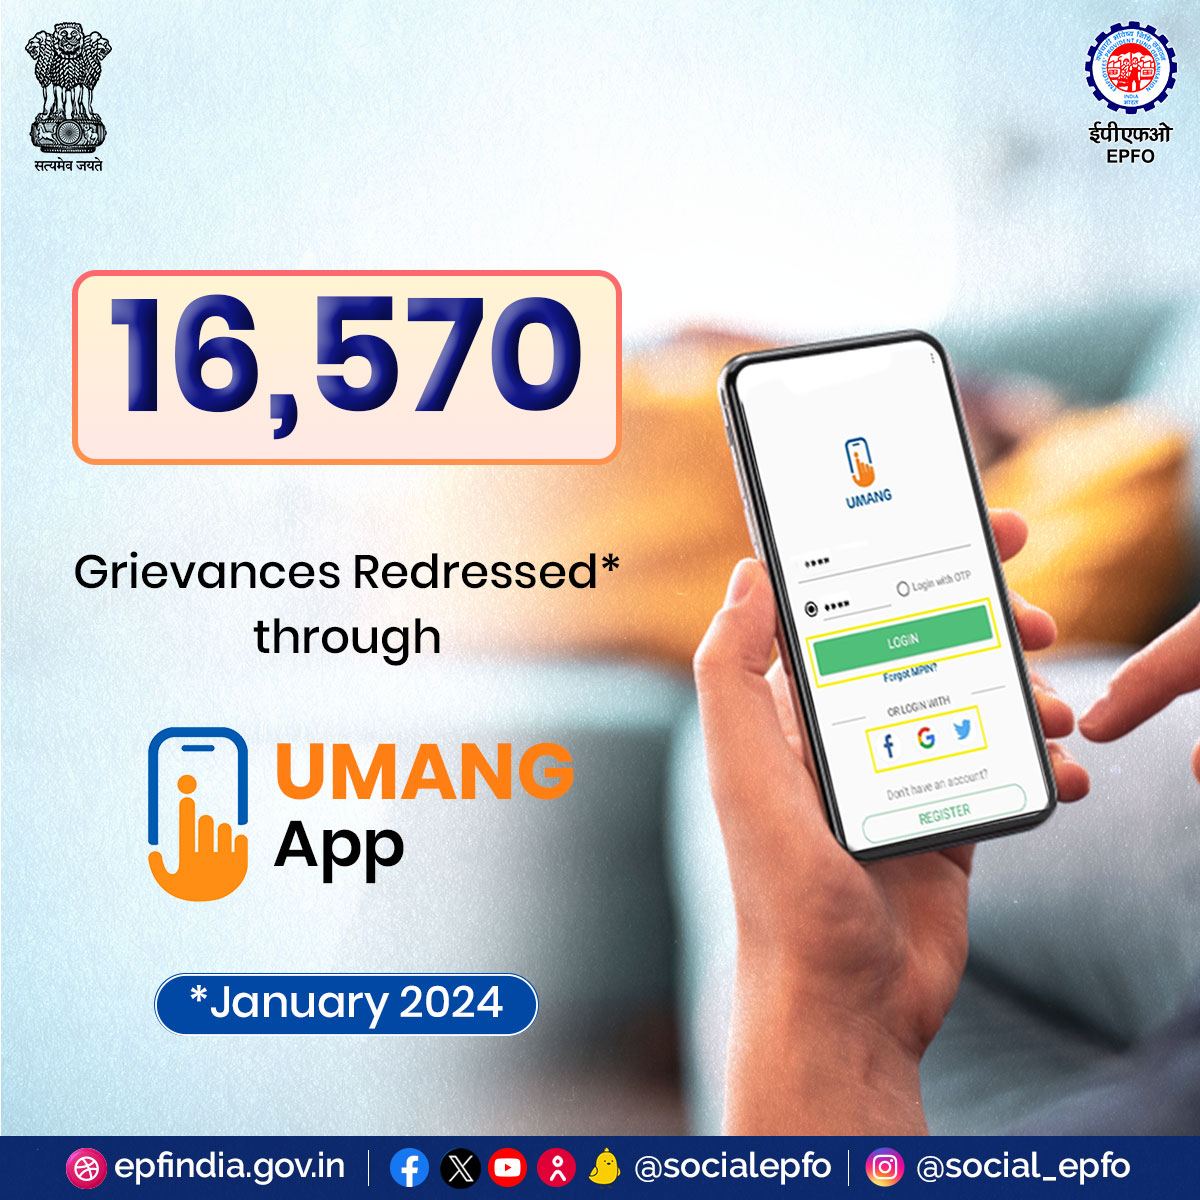 A Hassel Free Process for Grievance Redressal! 

During the month of January 2024, 16,570 grievances have been redressed through UMANG APP.   

#UmangApp #Redressal #DigitalService #EPFOwithYou #EPFO #EPF #EPS #PF #HumHaiNa #ईपीएफ #पीएफ